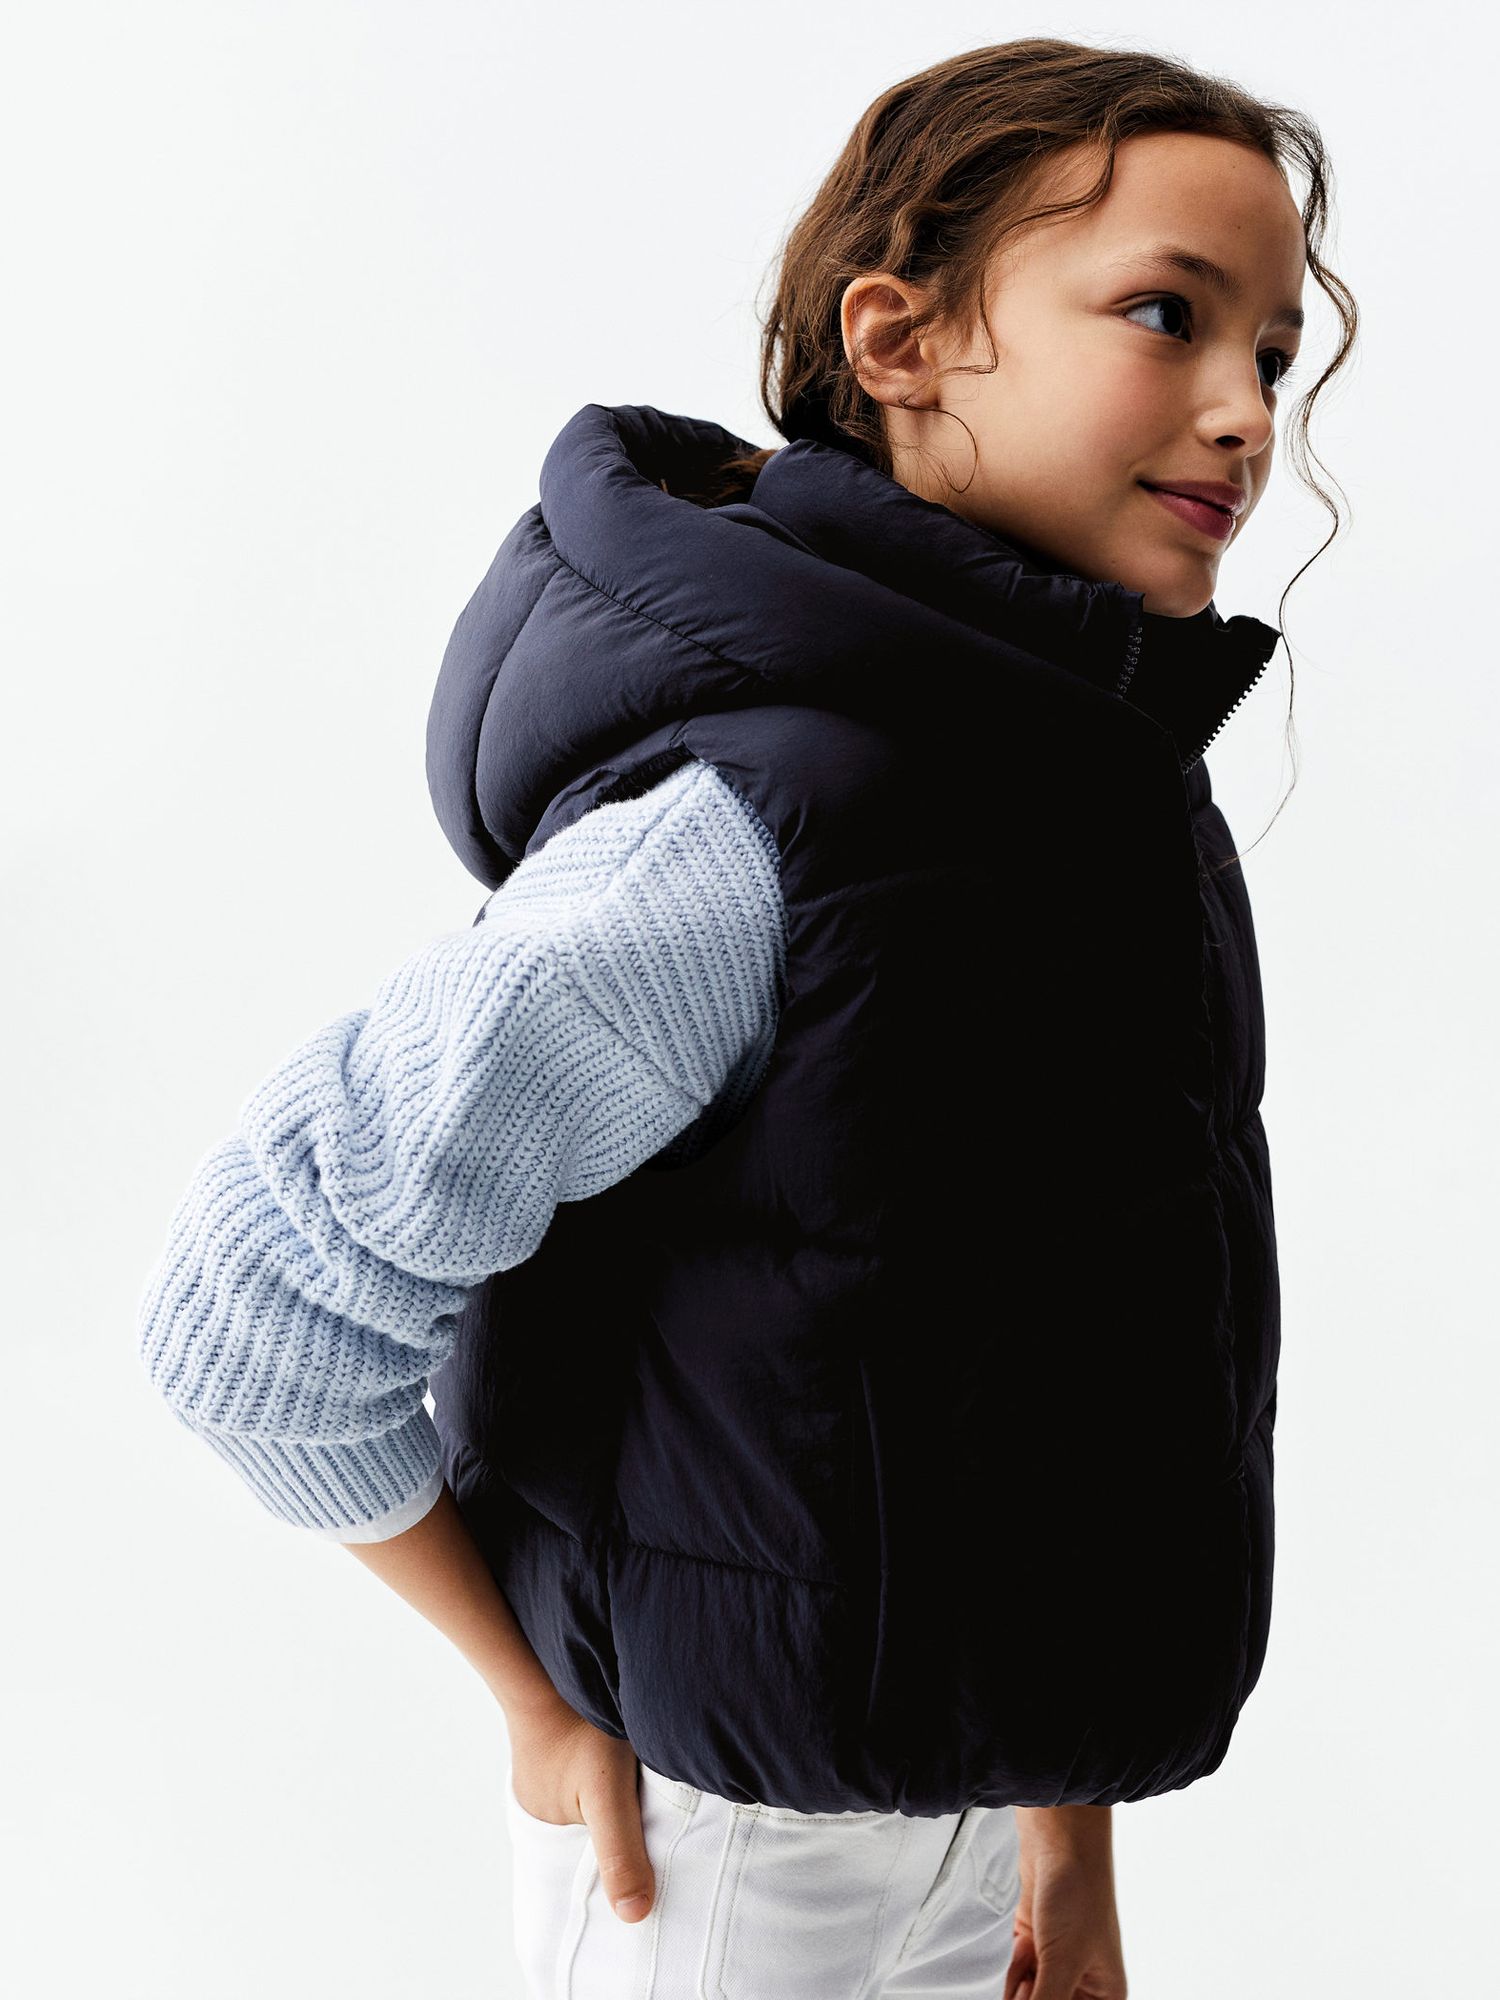 Mango Kids' Mariana Quilted Hooded Gilet, Navy, 5-6 years